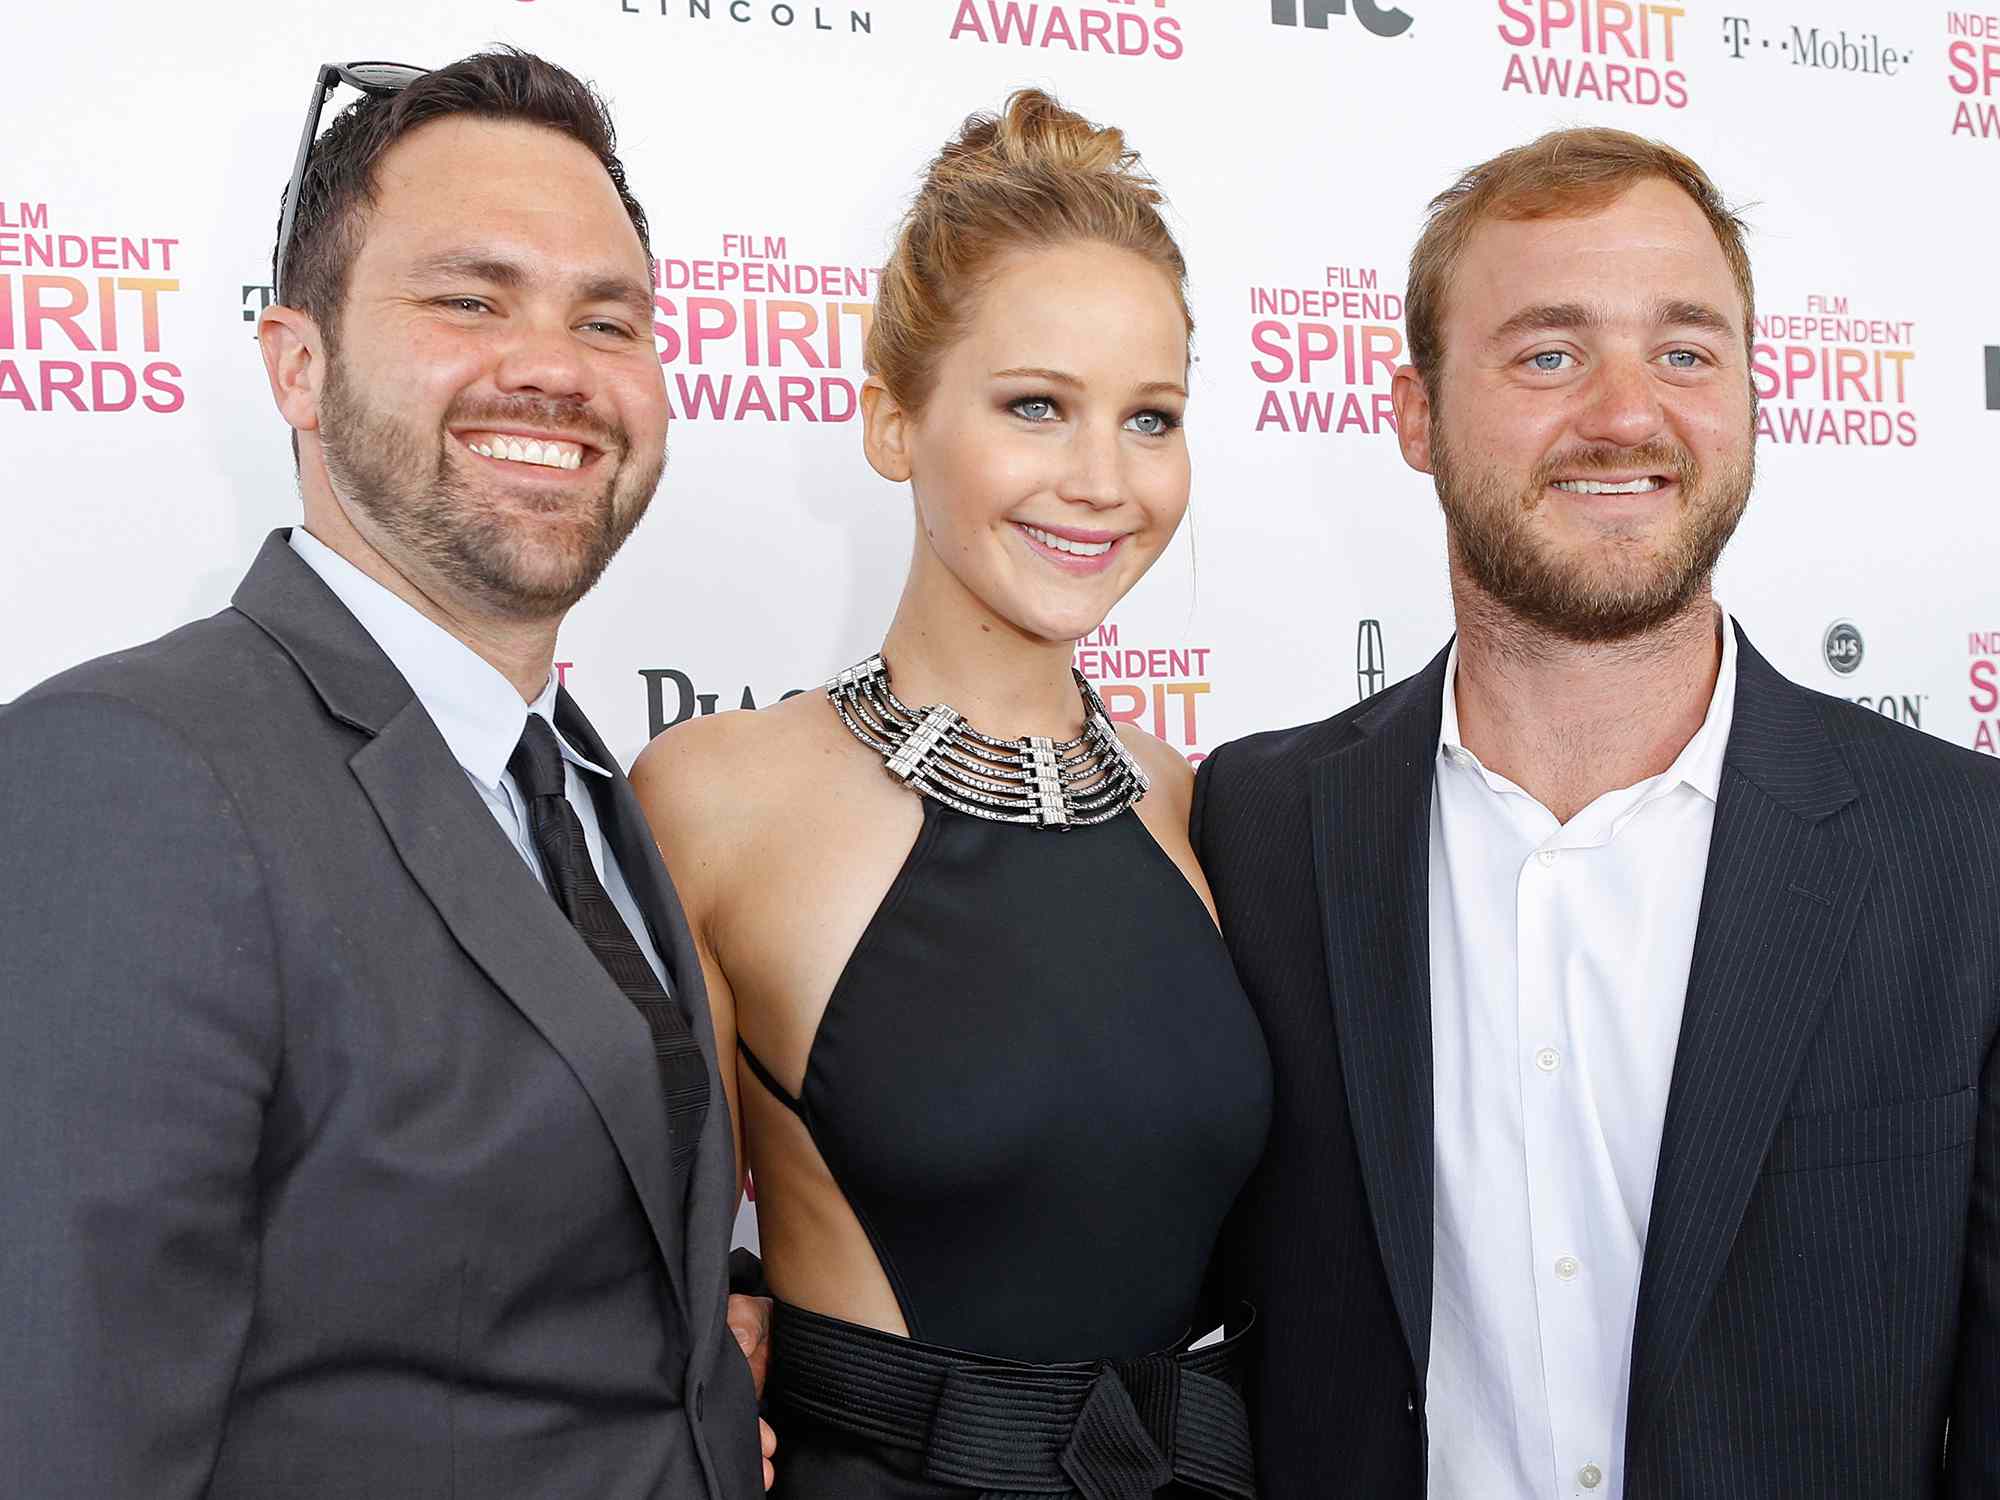 Jennifer Lawrence and her brothers, Ben and Blaine, at the 2013 Film Independent Spirit Awards